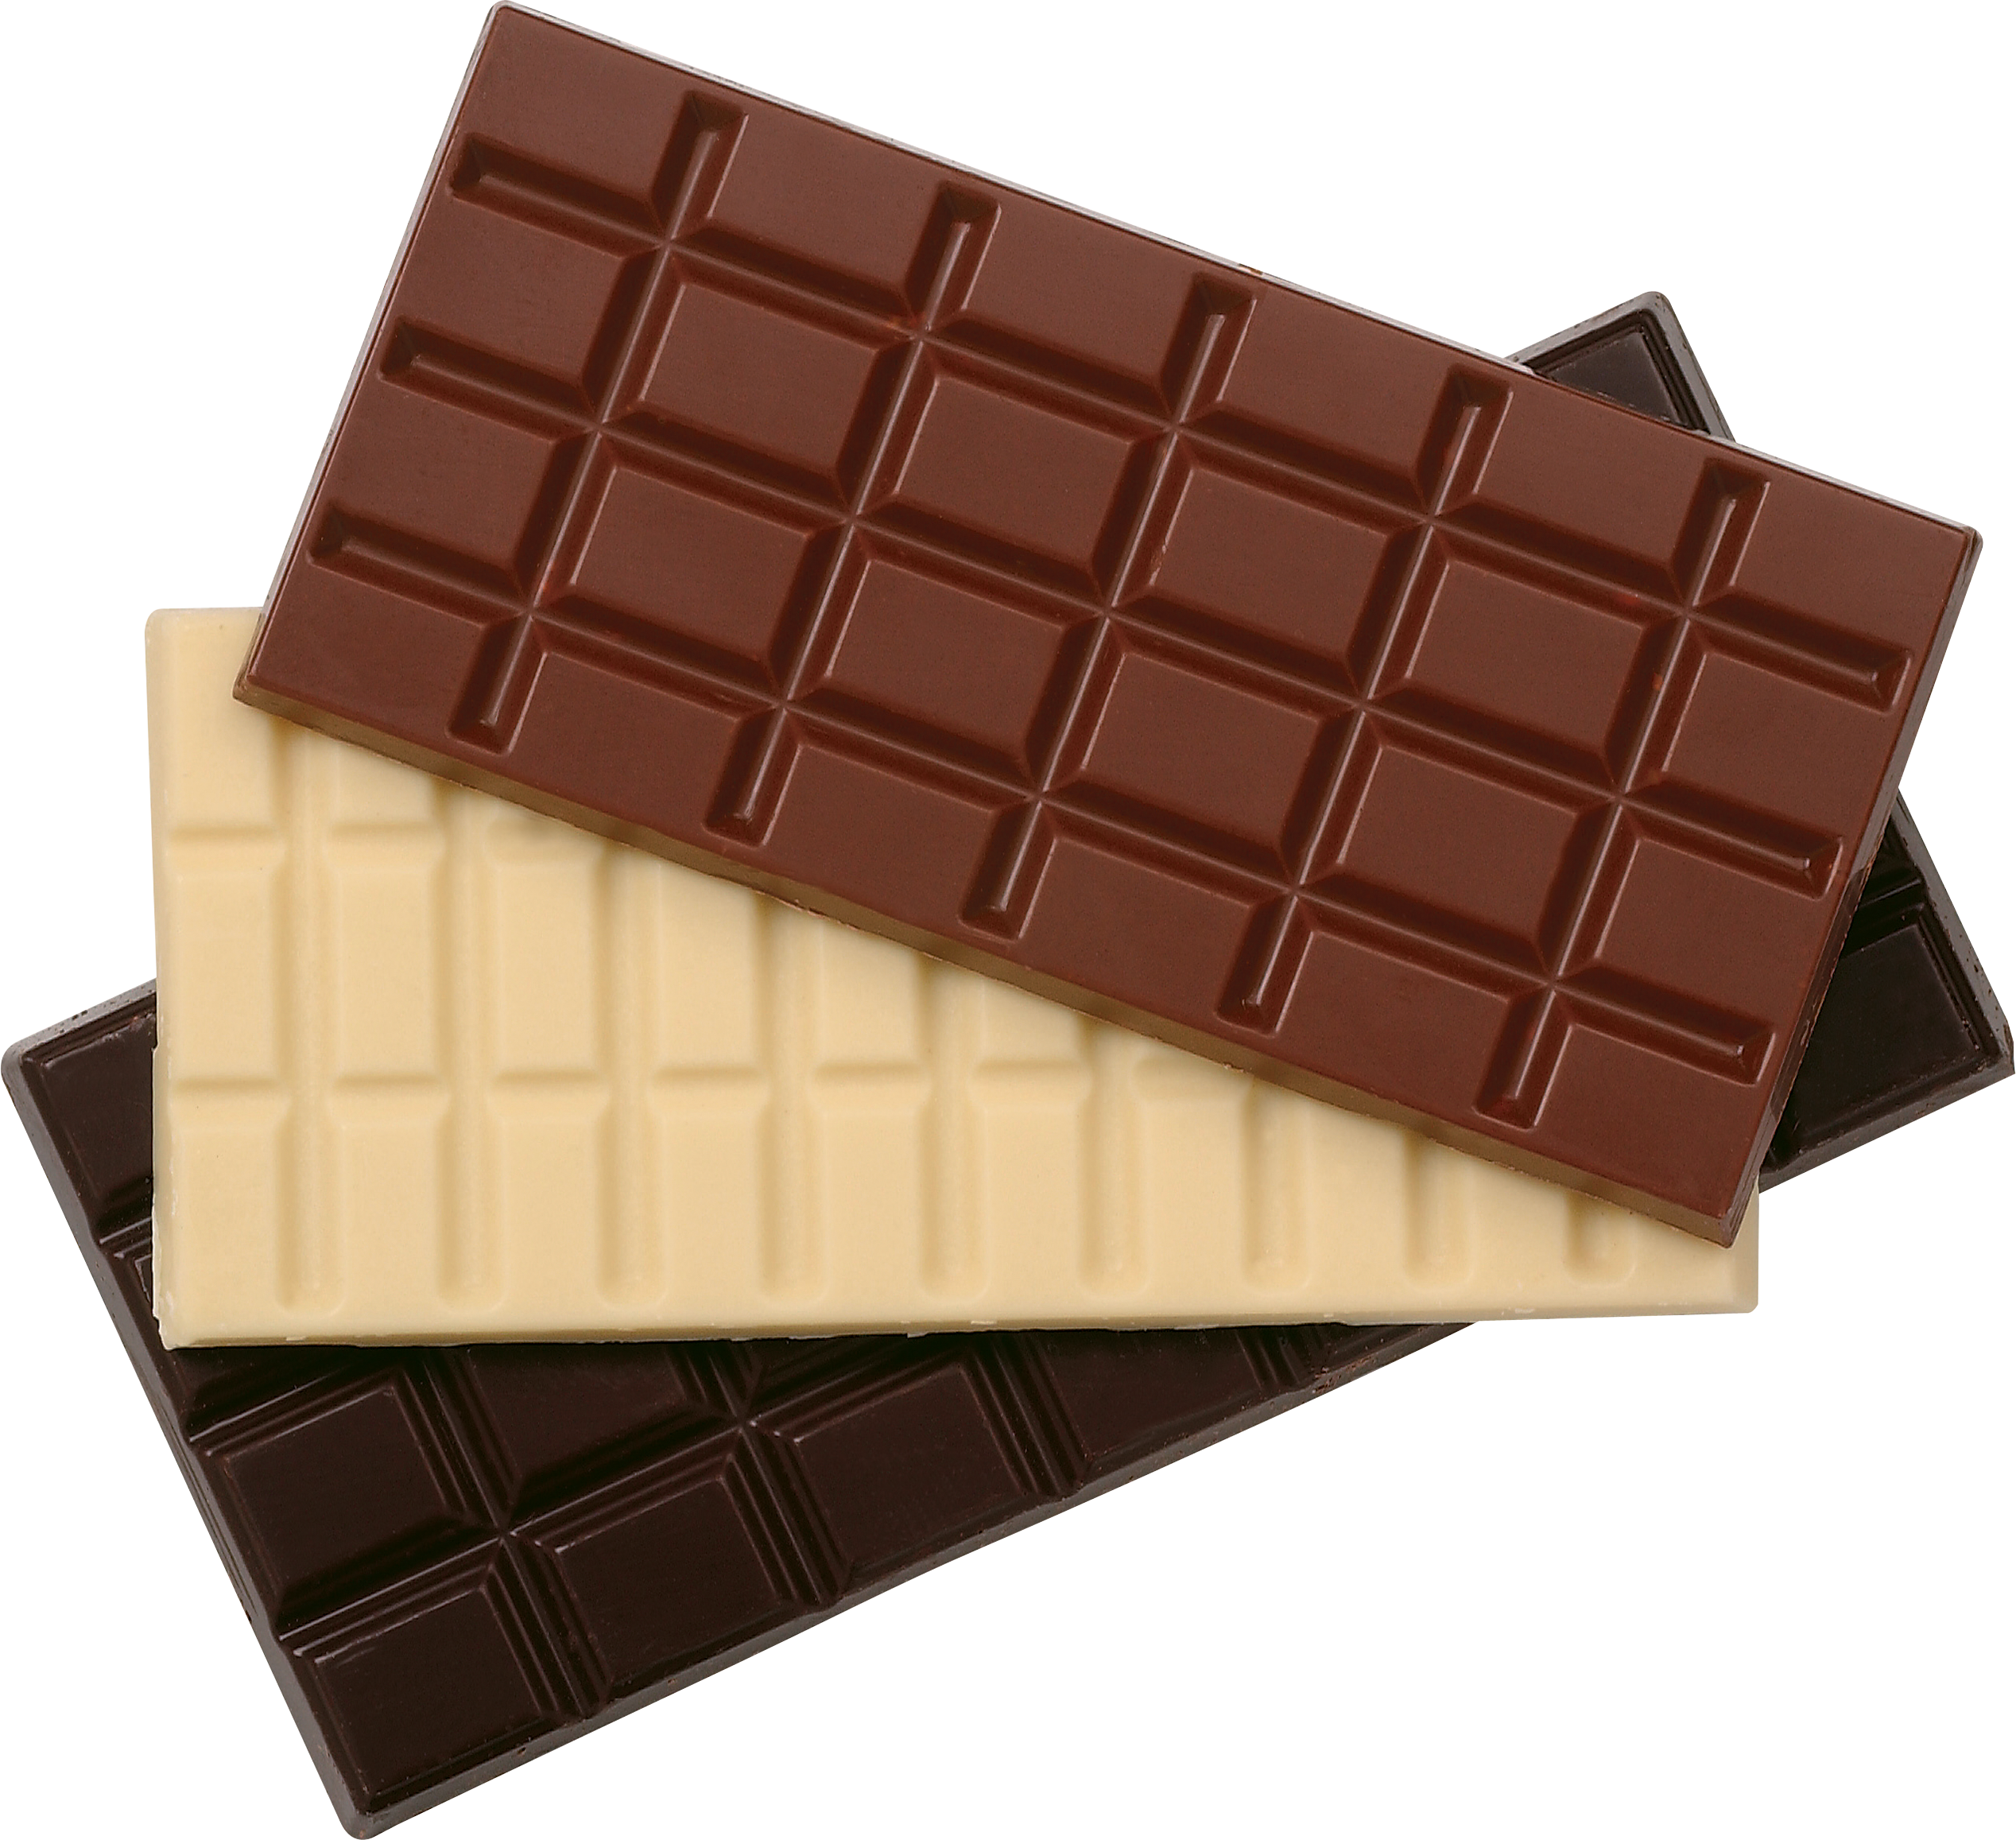 Chocolate Bars Png Image - Chocolate Bar, Transparent background PNG HD thumbnail